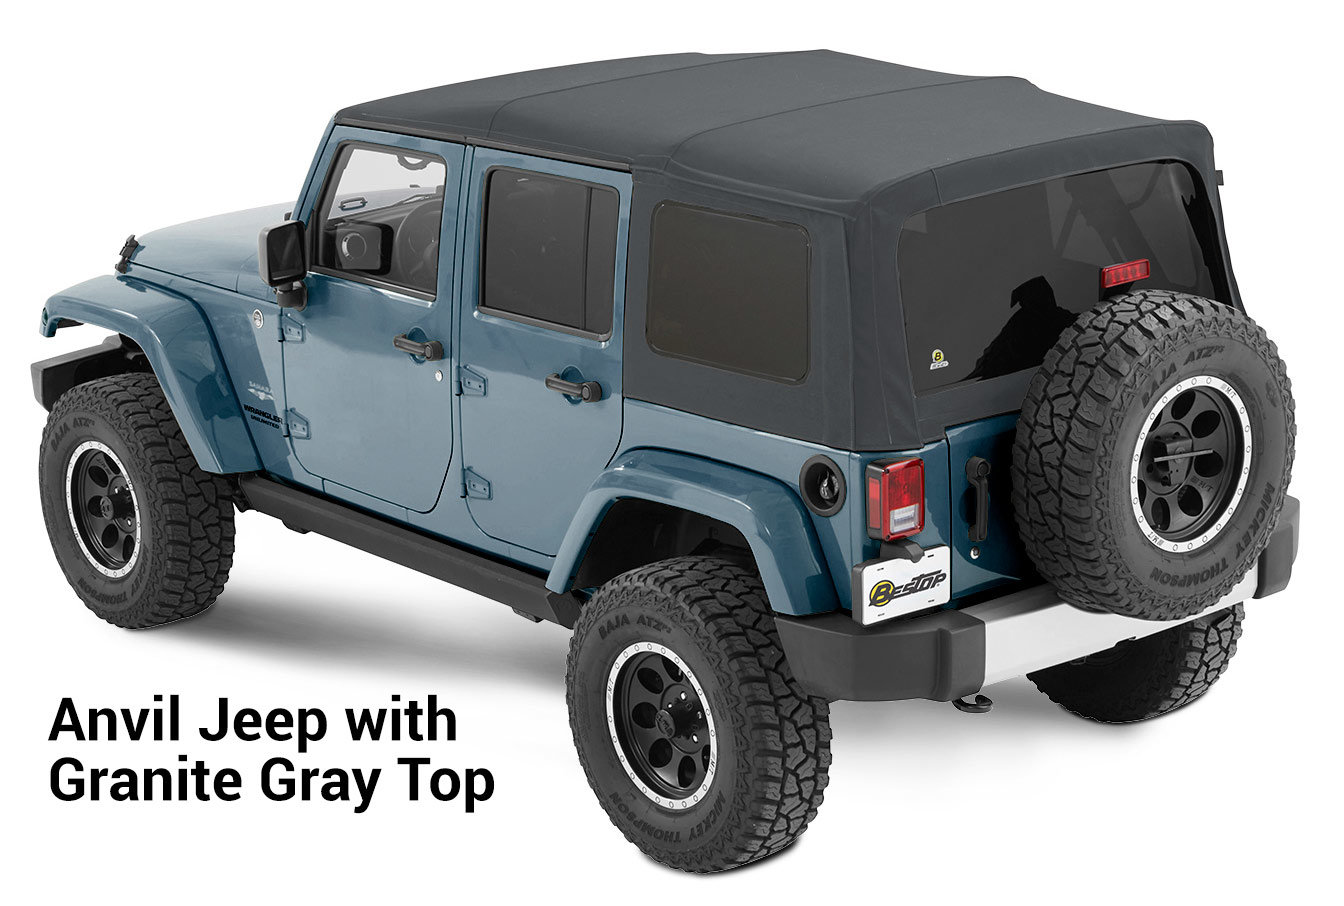 How To Choose A Colored Soft Top For Your Jeep Wrangler | Quadratec